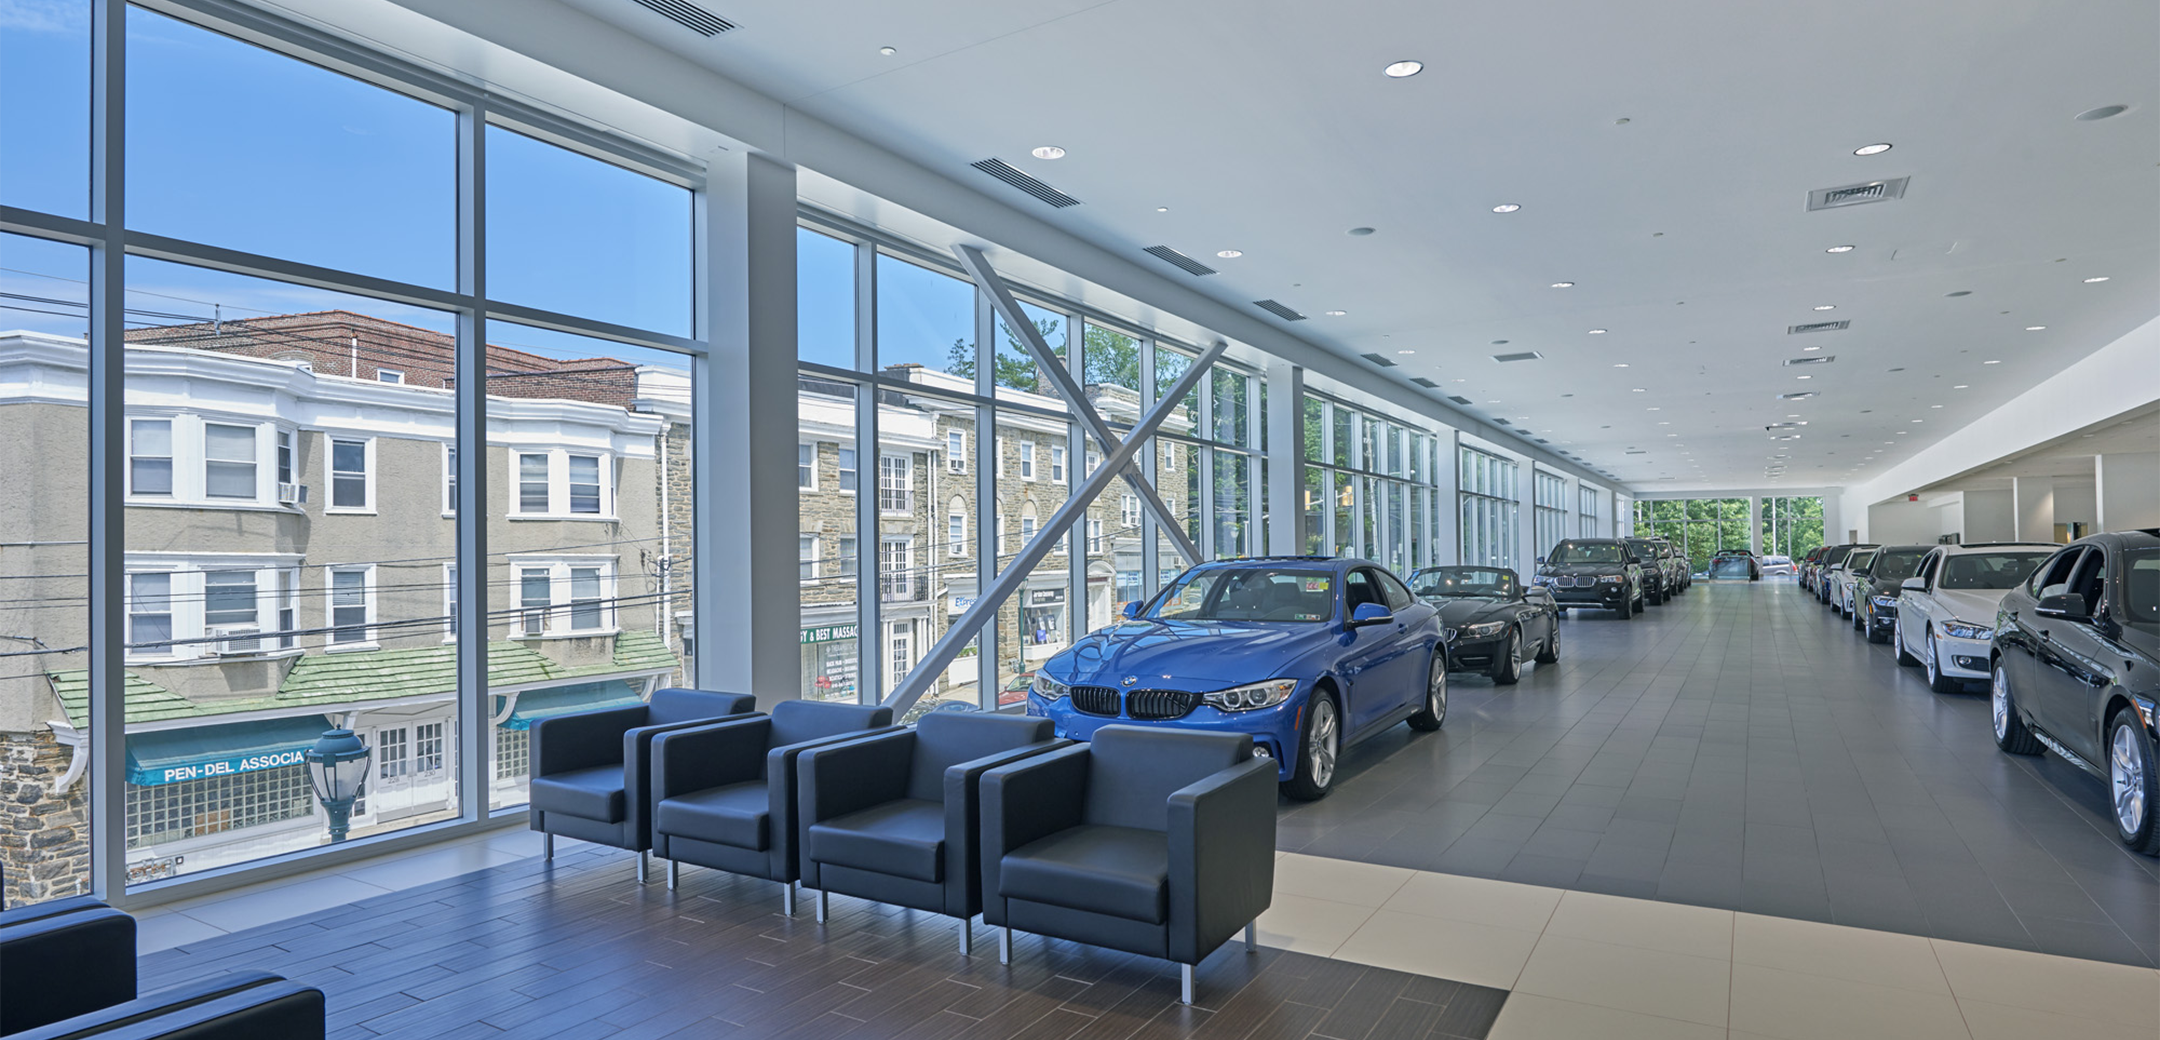 The interior view of the Main Line BMW building's second floor, showcasing the seating area, glass floor to ceiling wall on the left side and cars lined along the walls.